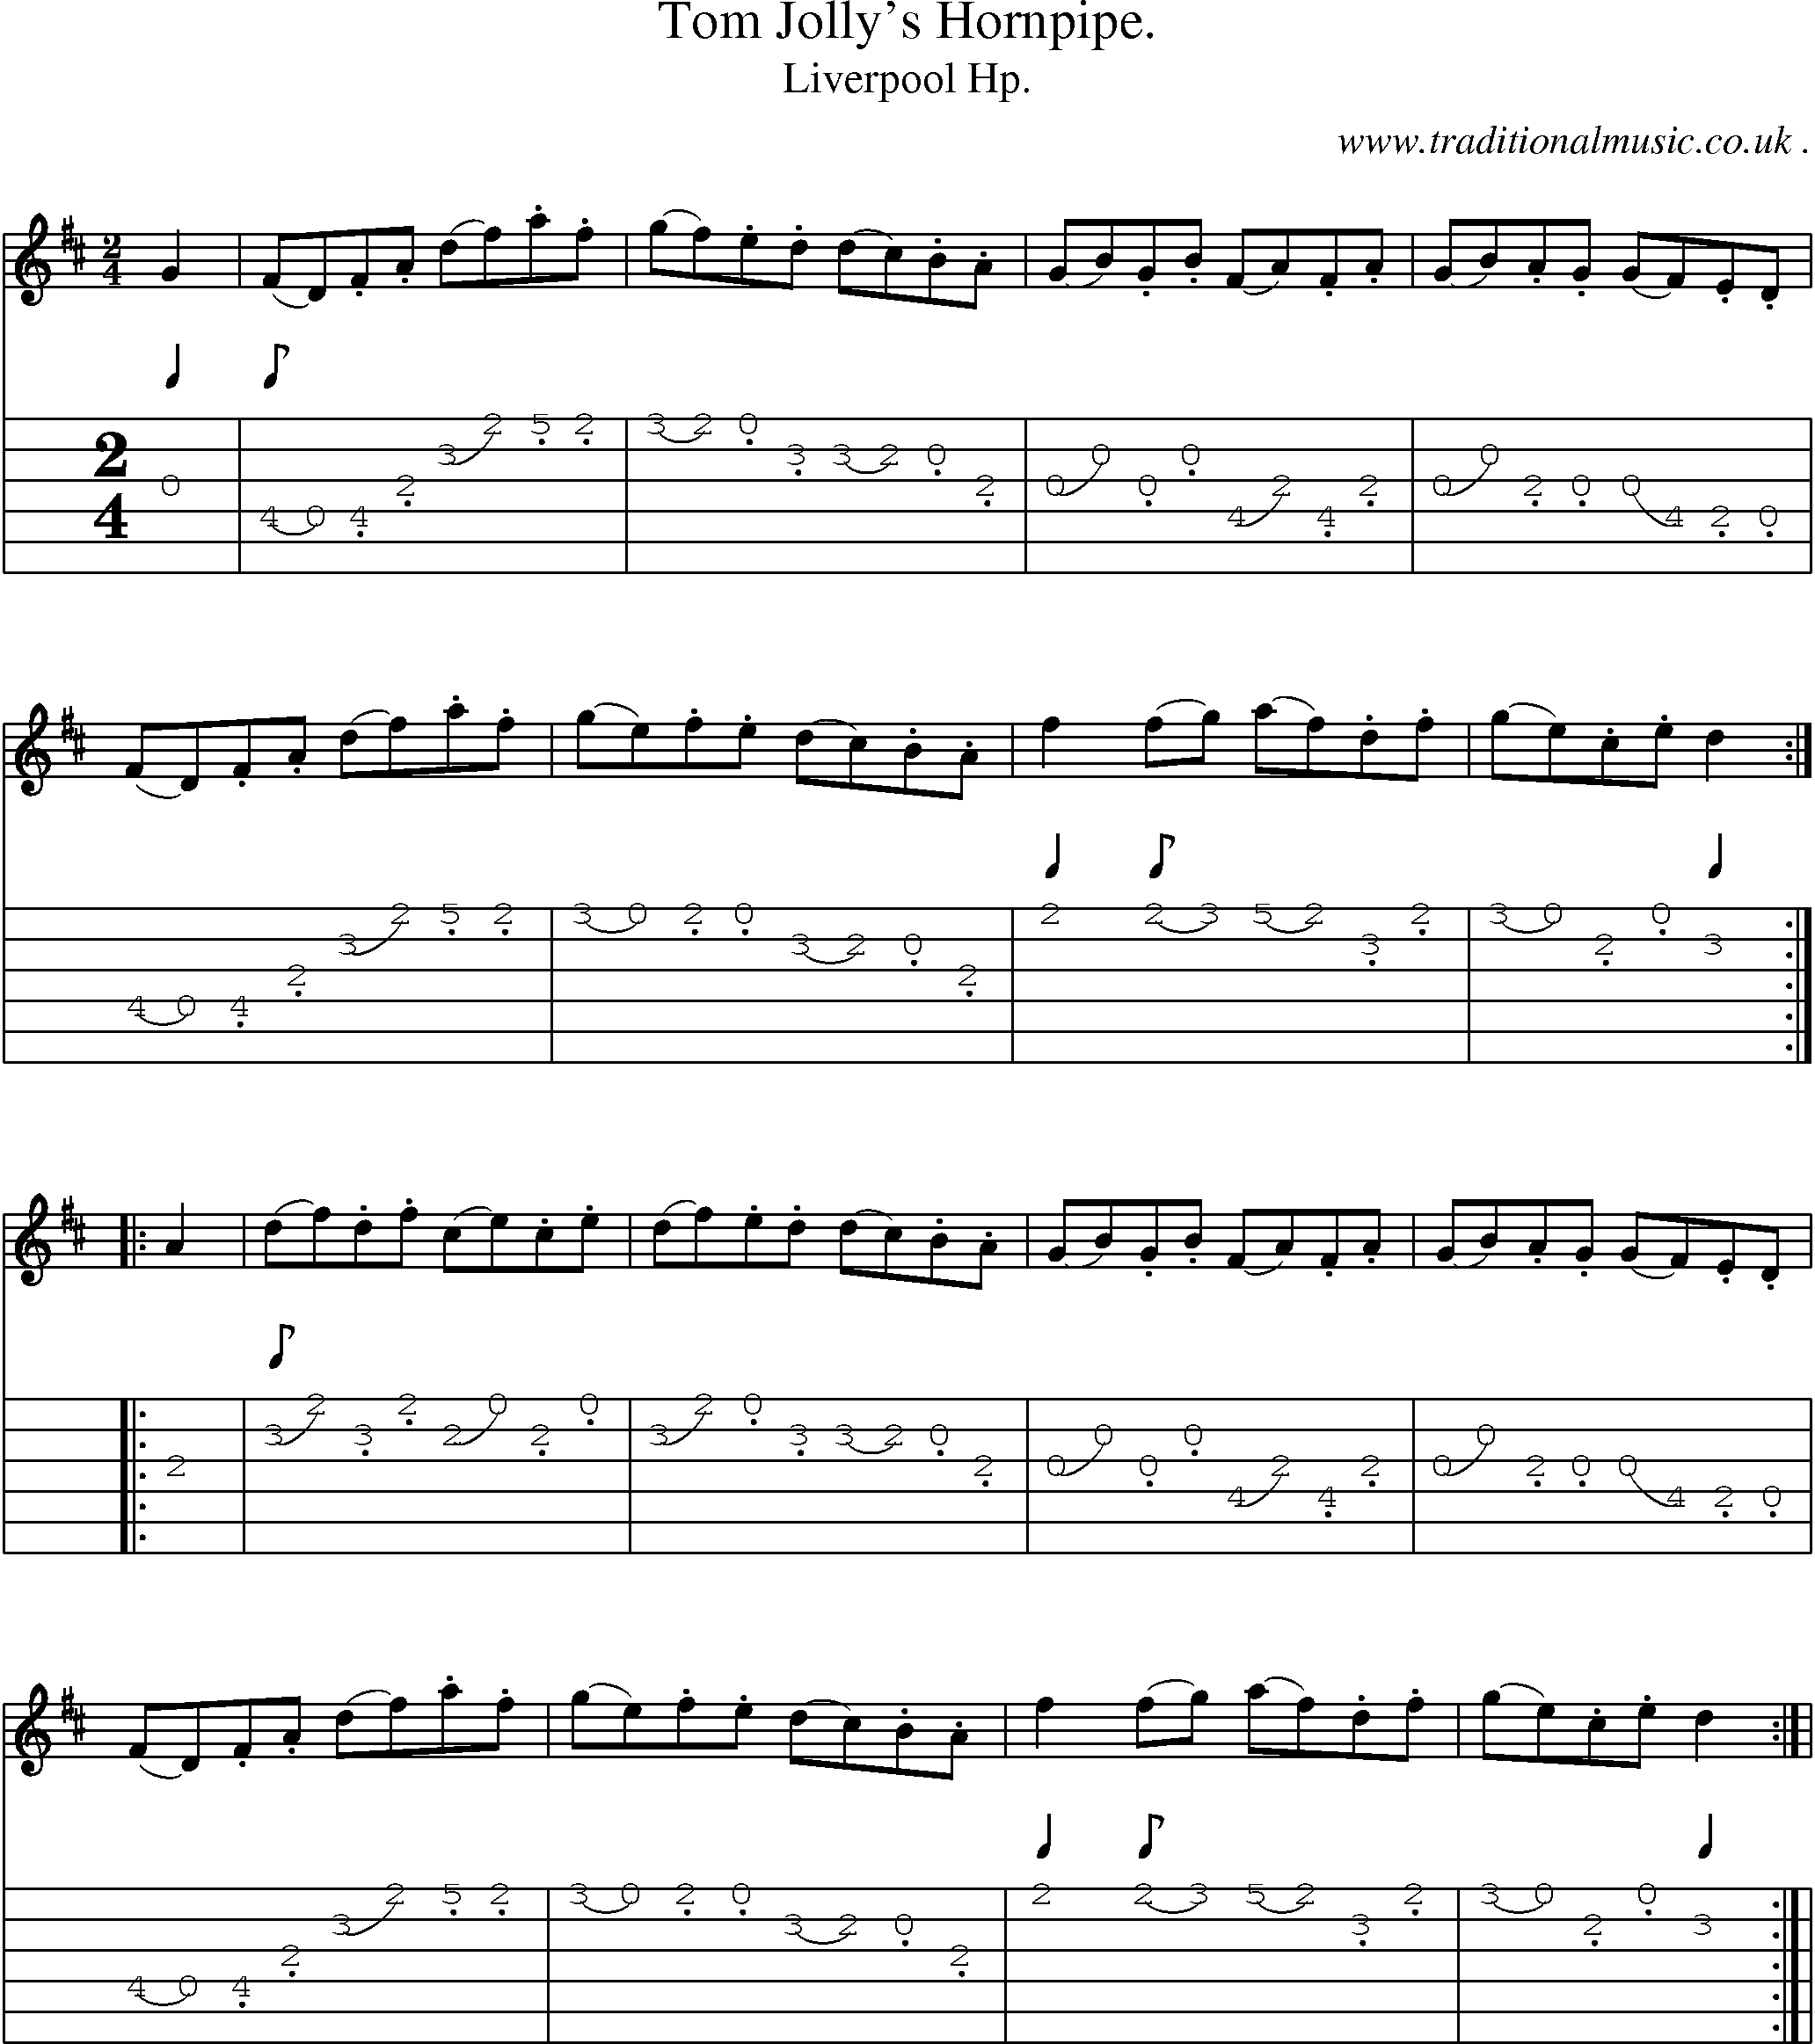 Sheet-Music and Guitar Tabs for Tom Jollys Hornpipe